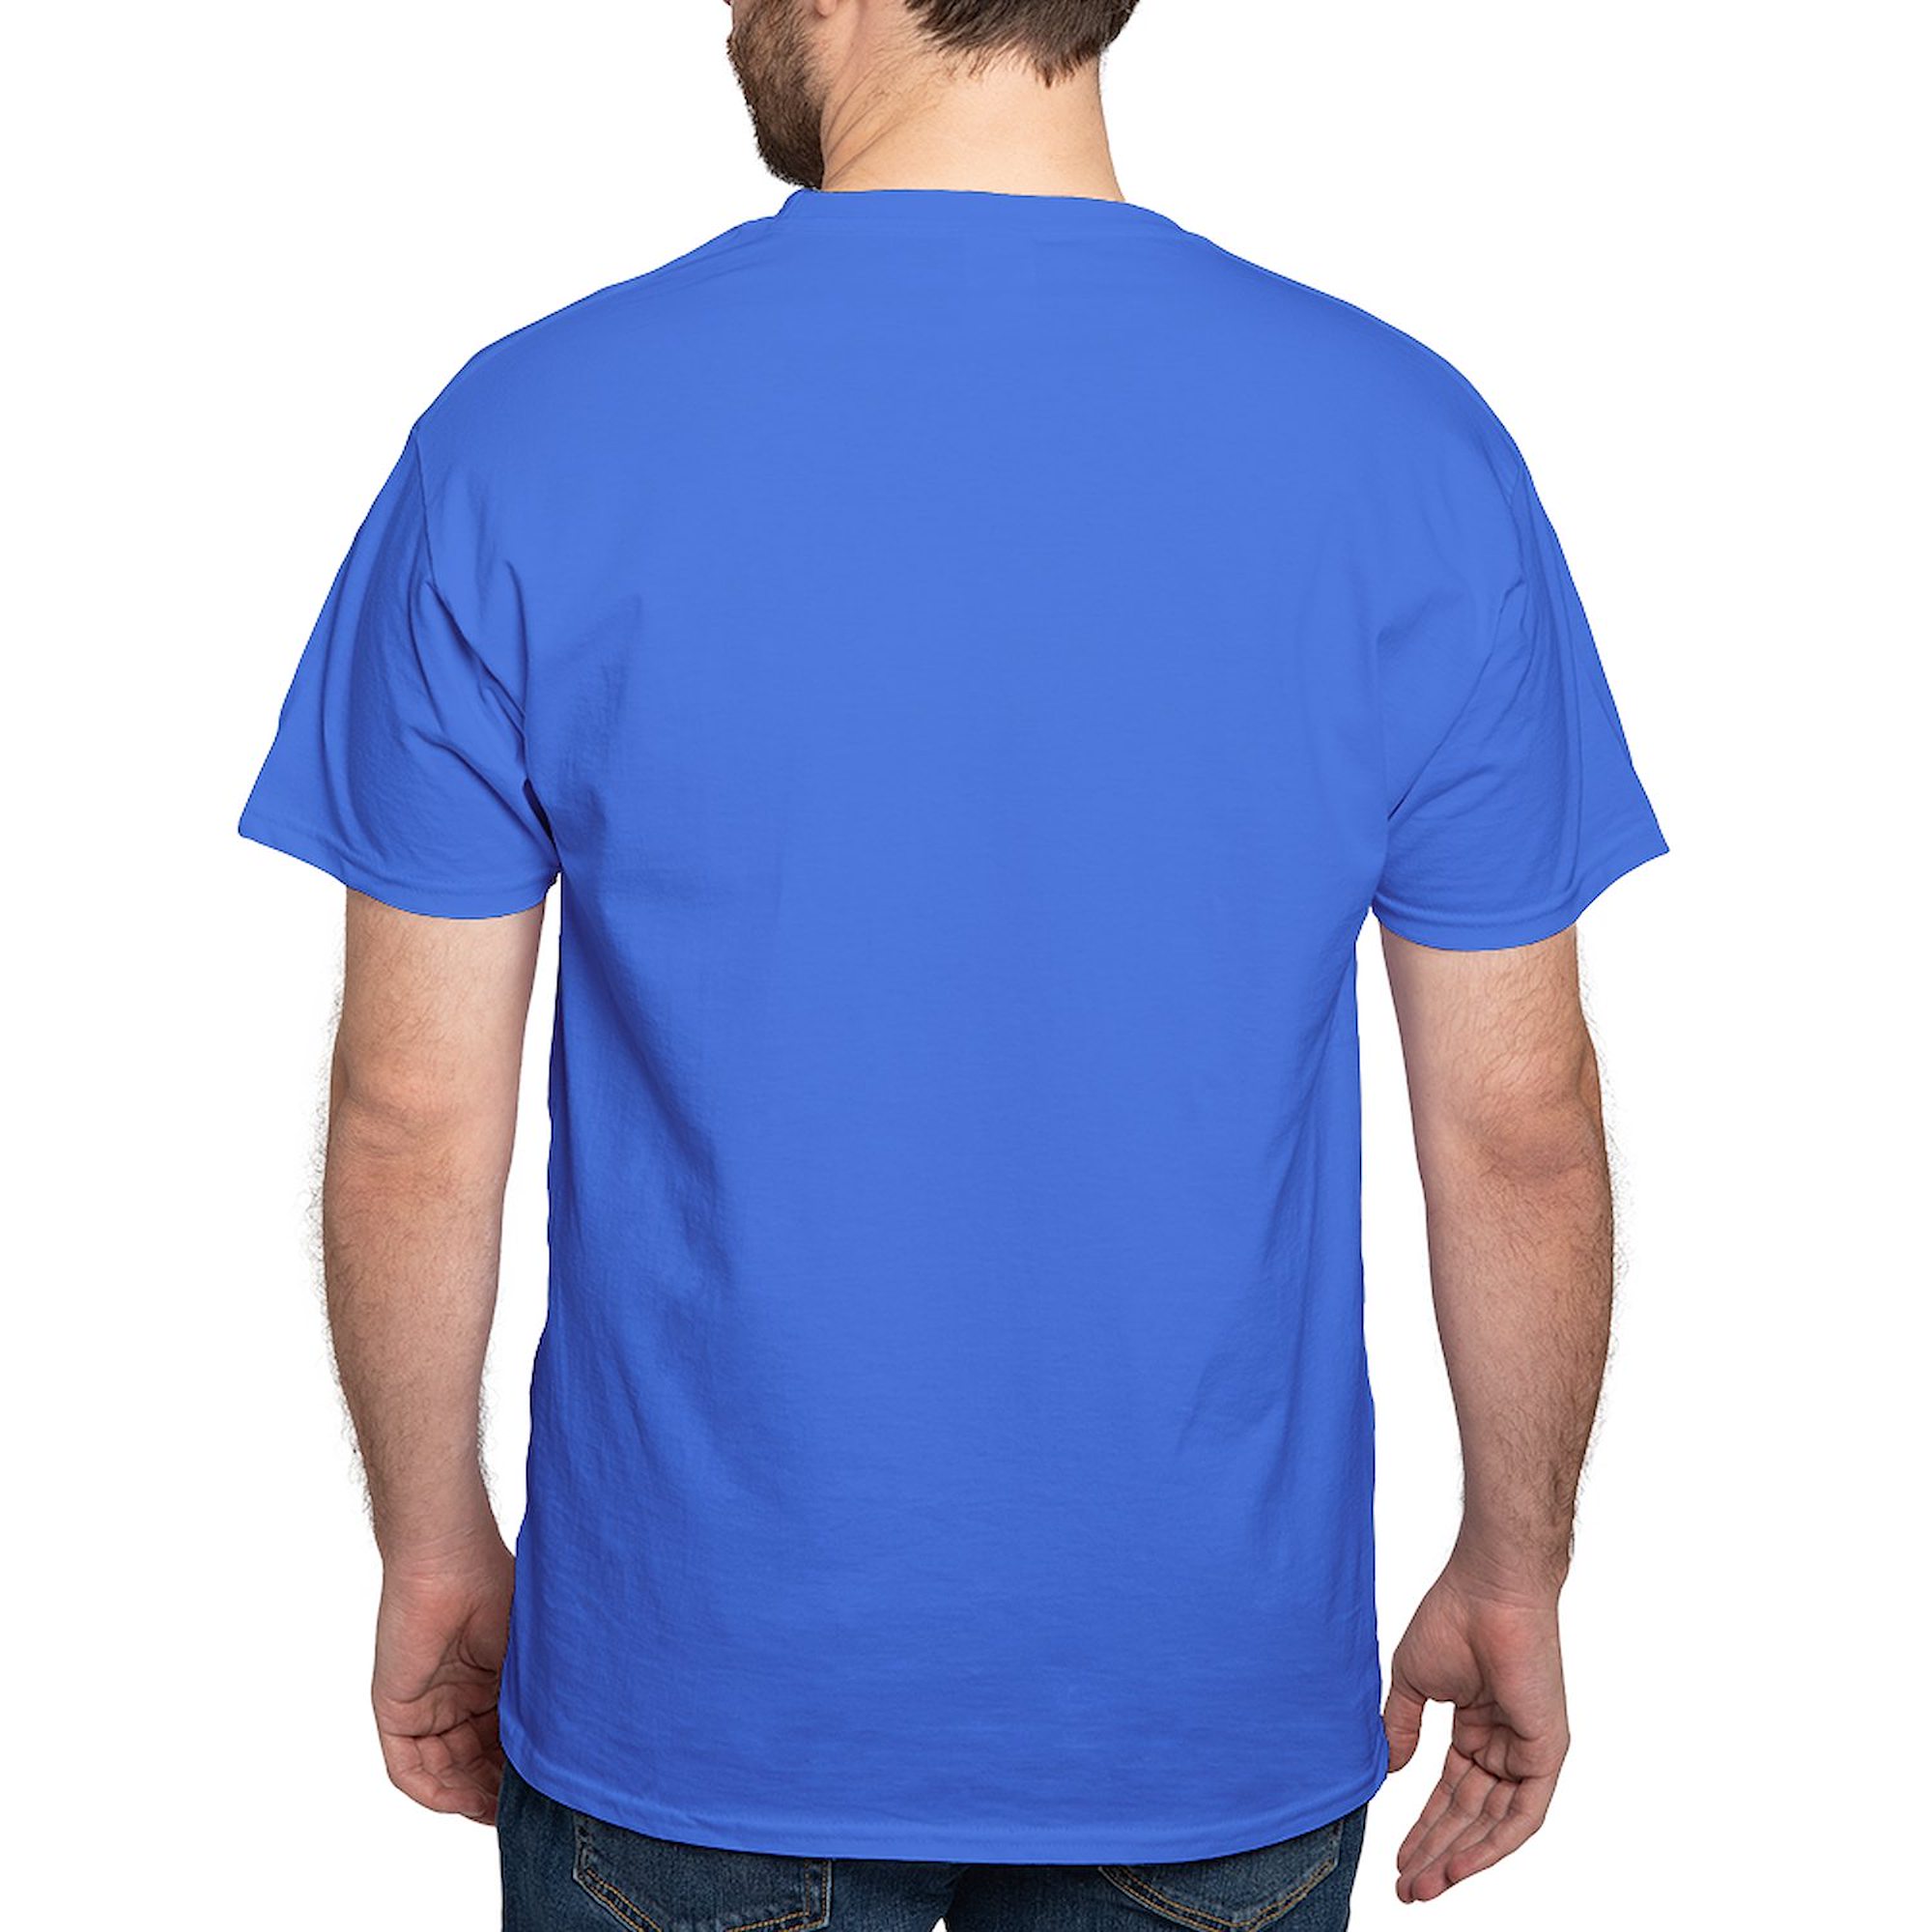 CafePress - Yes, I Do Have A Retirement Plan I Plan On Camping - 100% Cotton T-Shirt - image 2 of 4